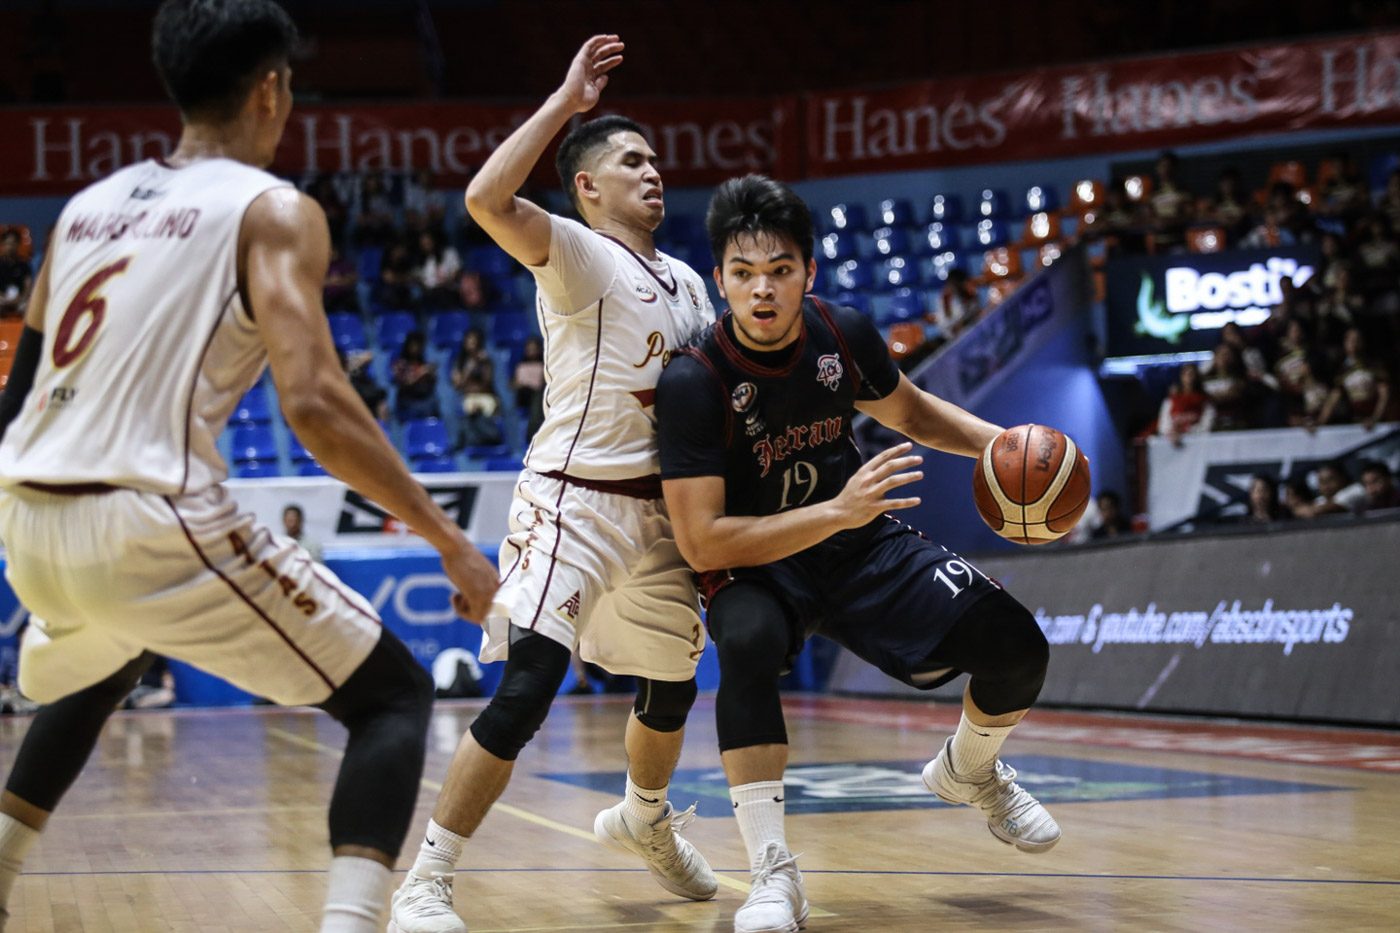 Letran clinches 3rd seed in NCAA thriller over Perpetual